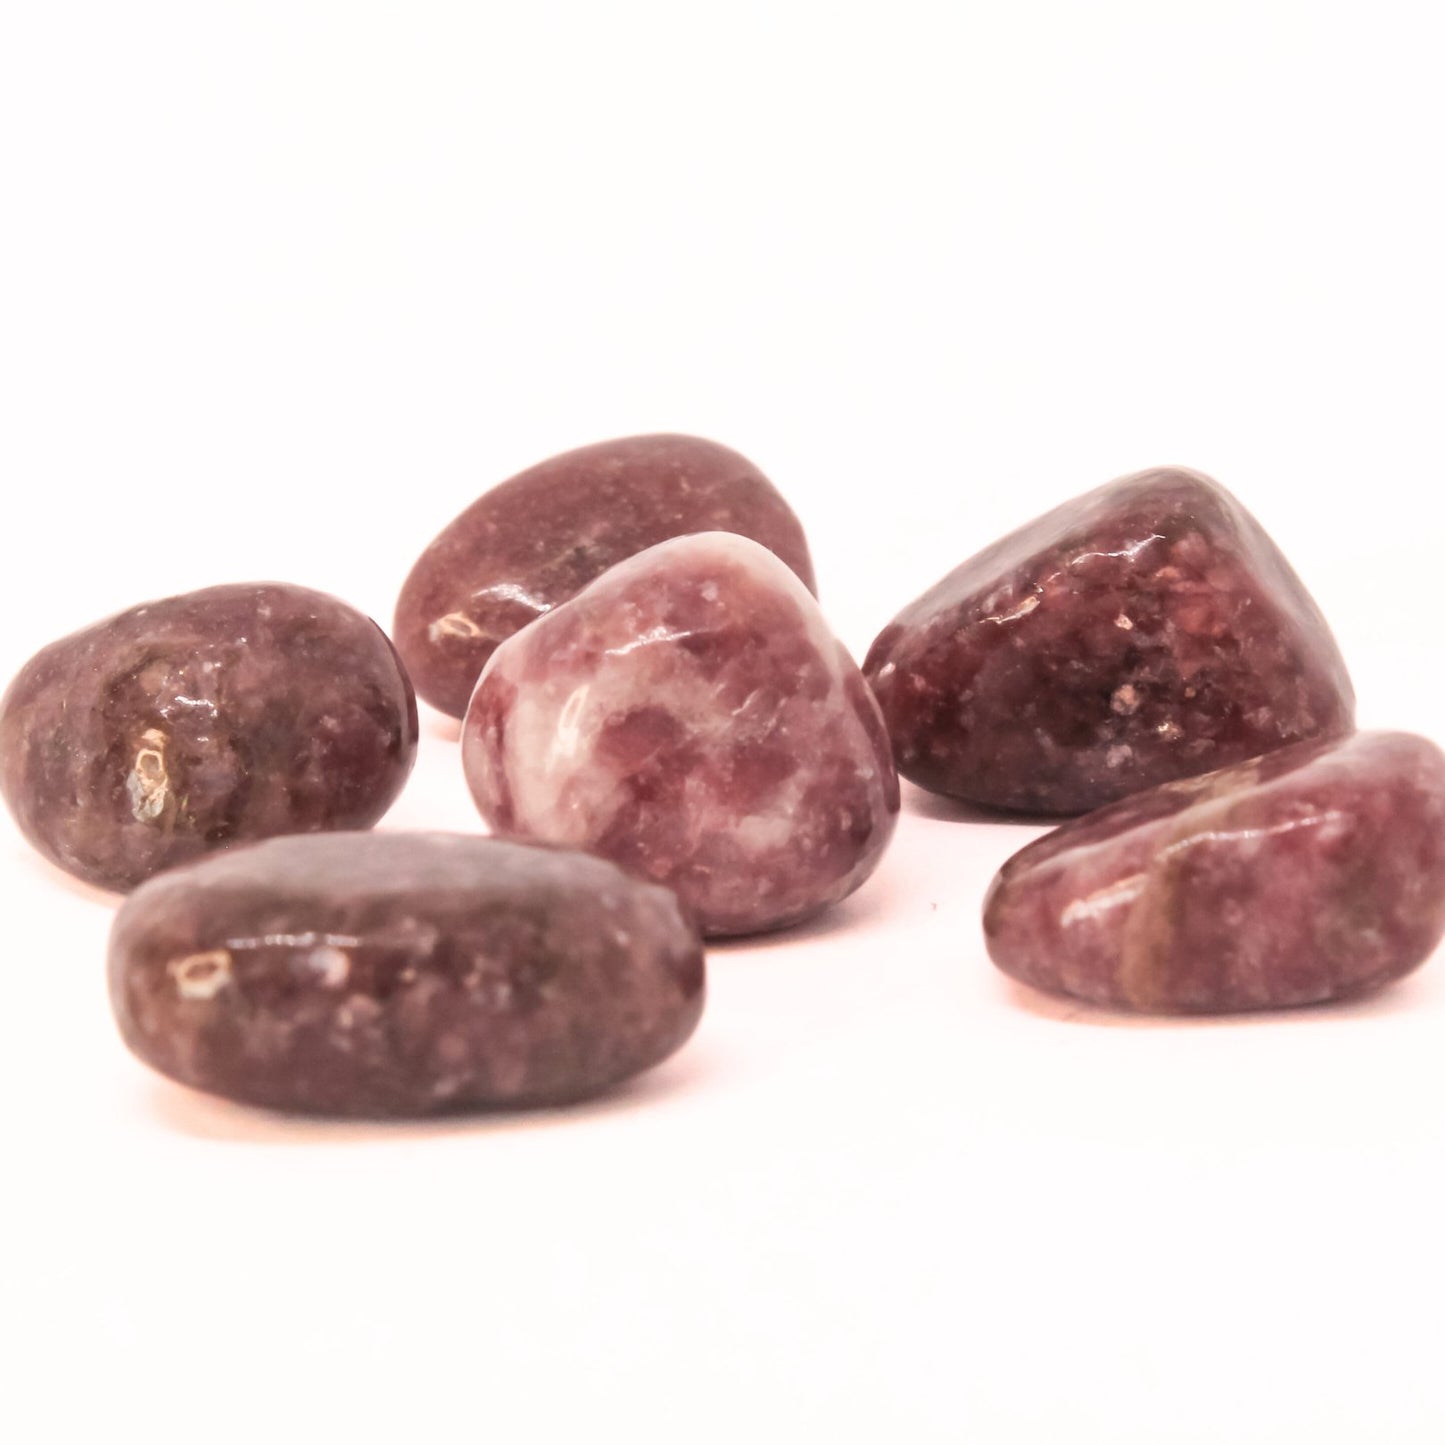 Lepidolite Tumble - Conscious Crystals New Zealand Crystal and Spiritual Shop